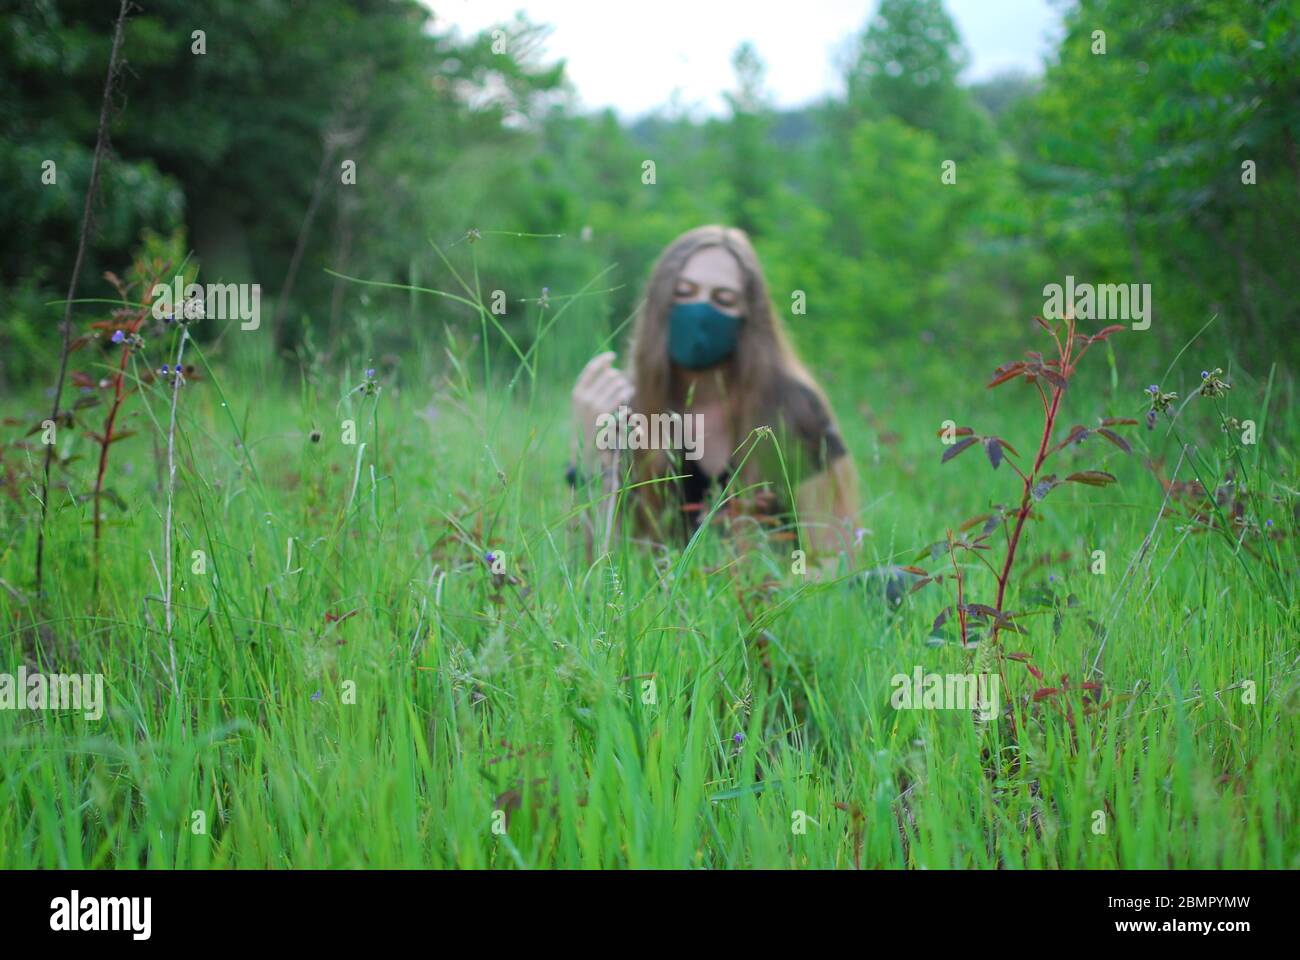 A woman wearing a mask in a field. Stock Photo